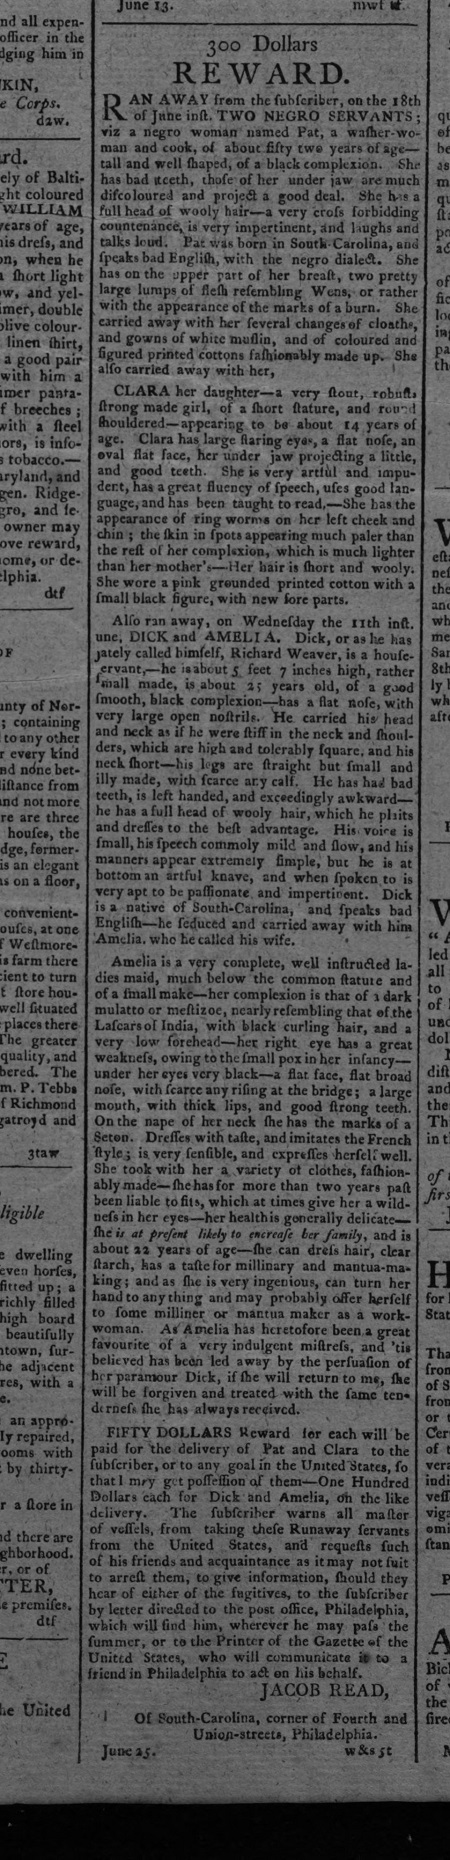 South Carolina Senator Jacob Read advertises for the recovery of multiple enslaved persons who ran away from him while in Philadelphia.